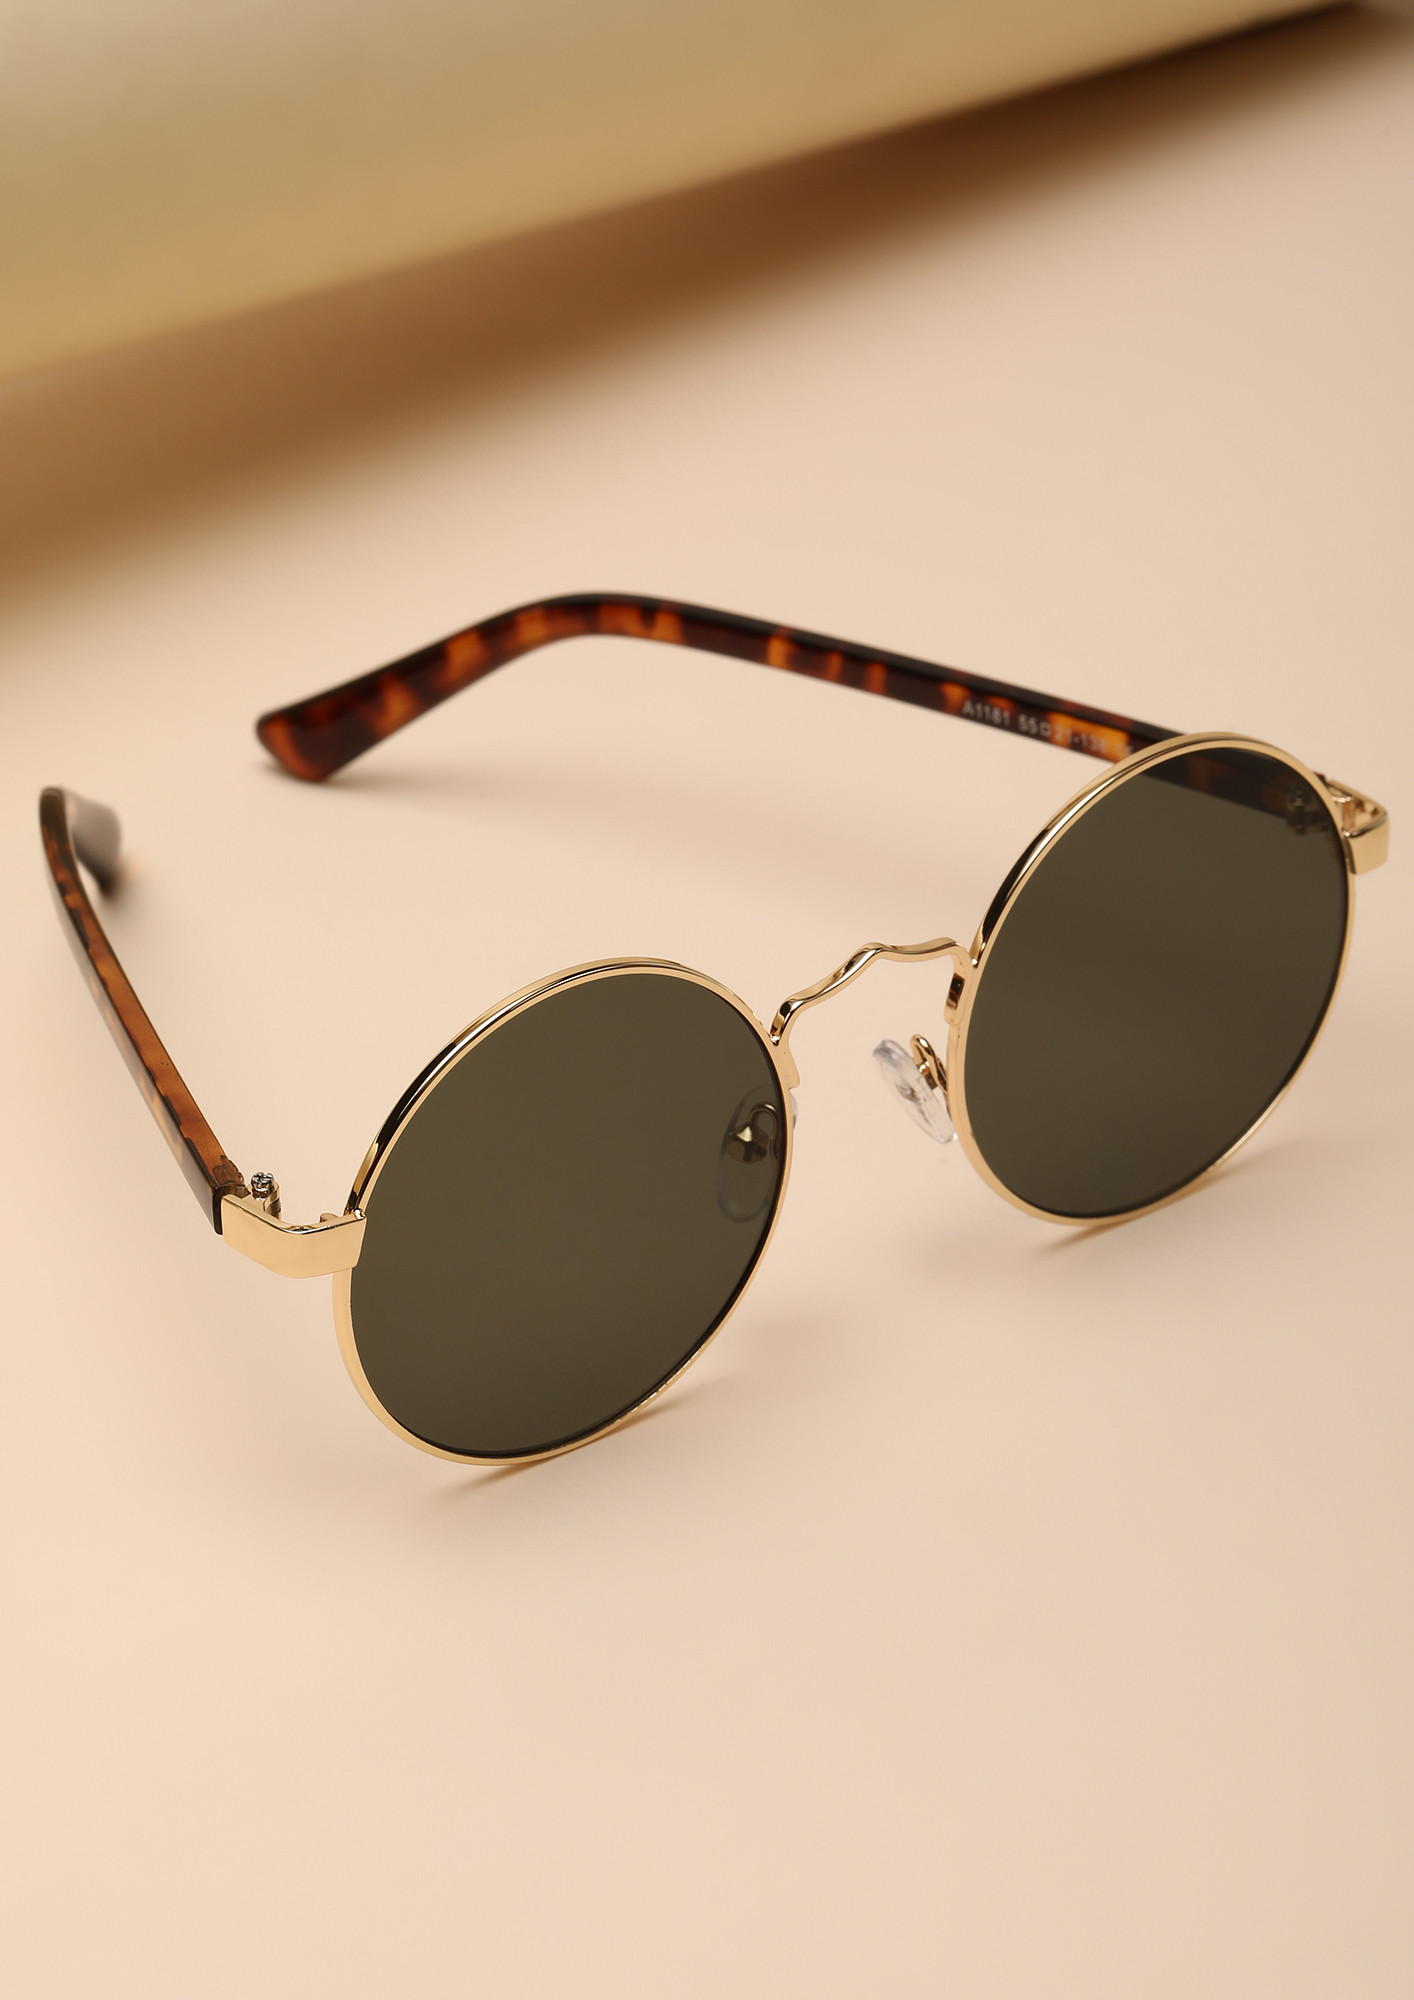 CLASSIC AND COOL FOREVER OLIVE ROUND SUNGLASSES